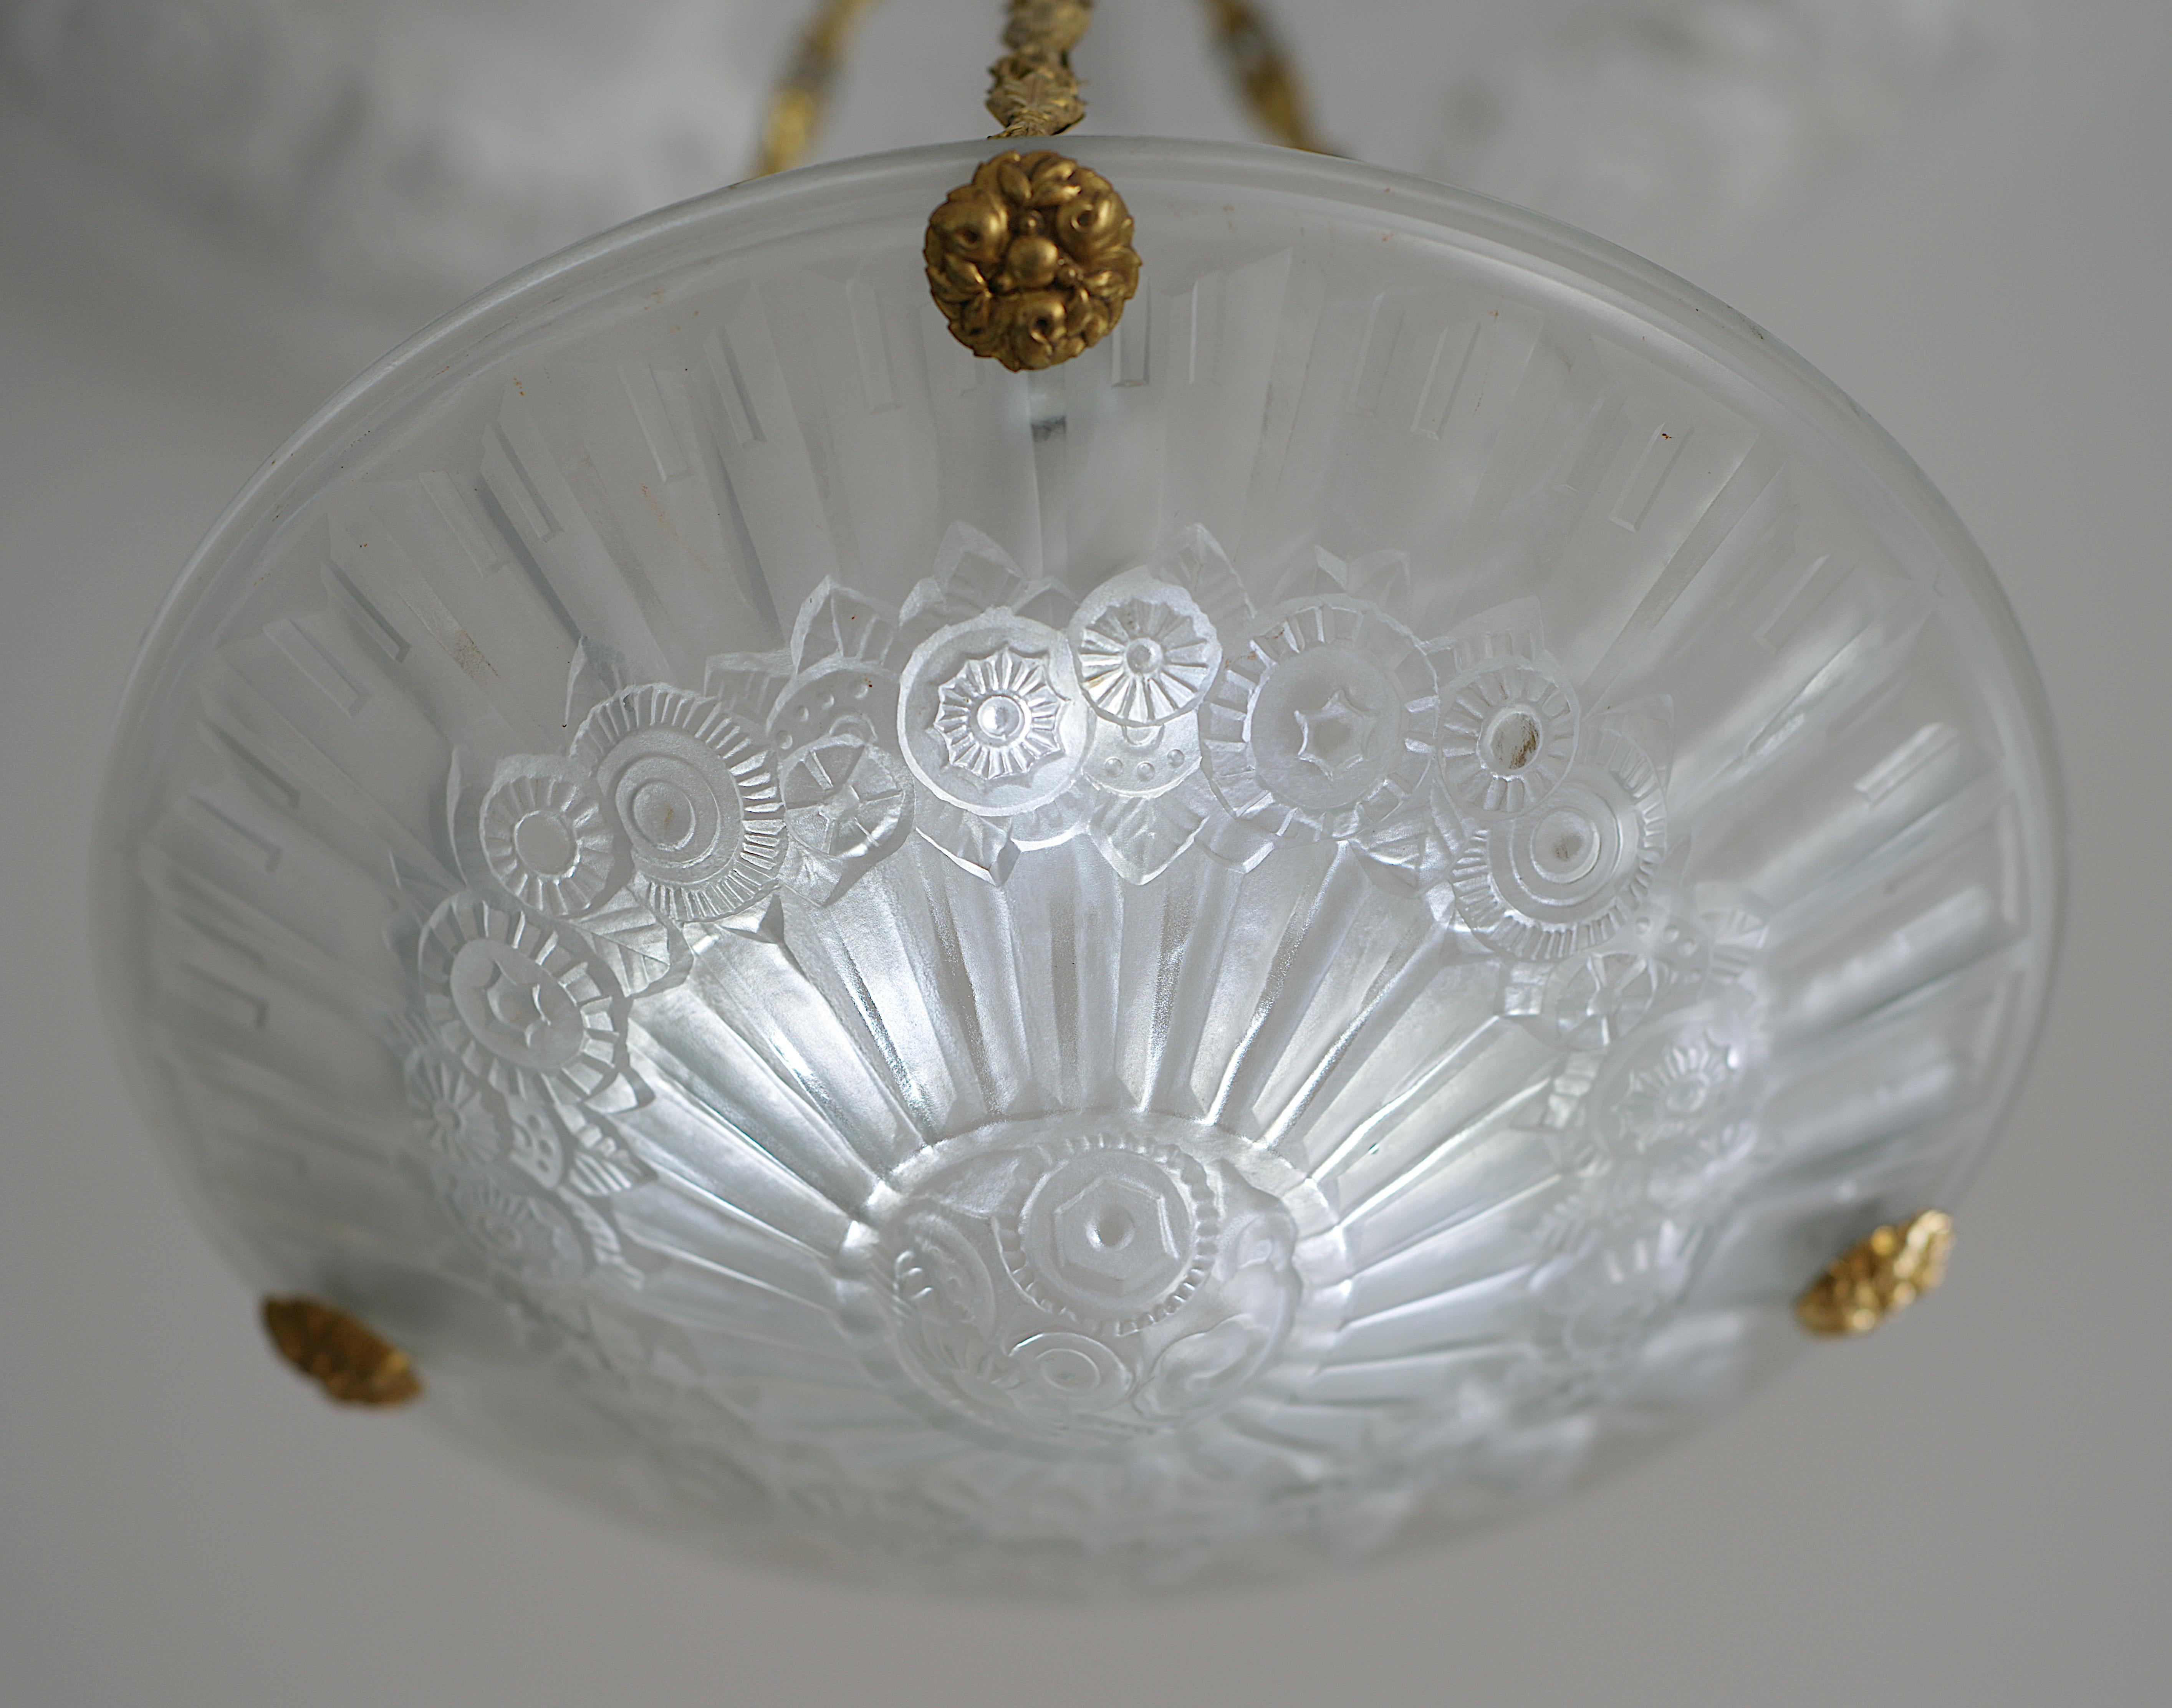 Molded Jean Gauthier French Art Deco Pendant Chandelier, Late 1920s For Sale